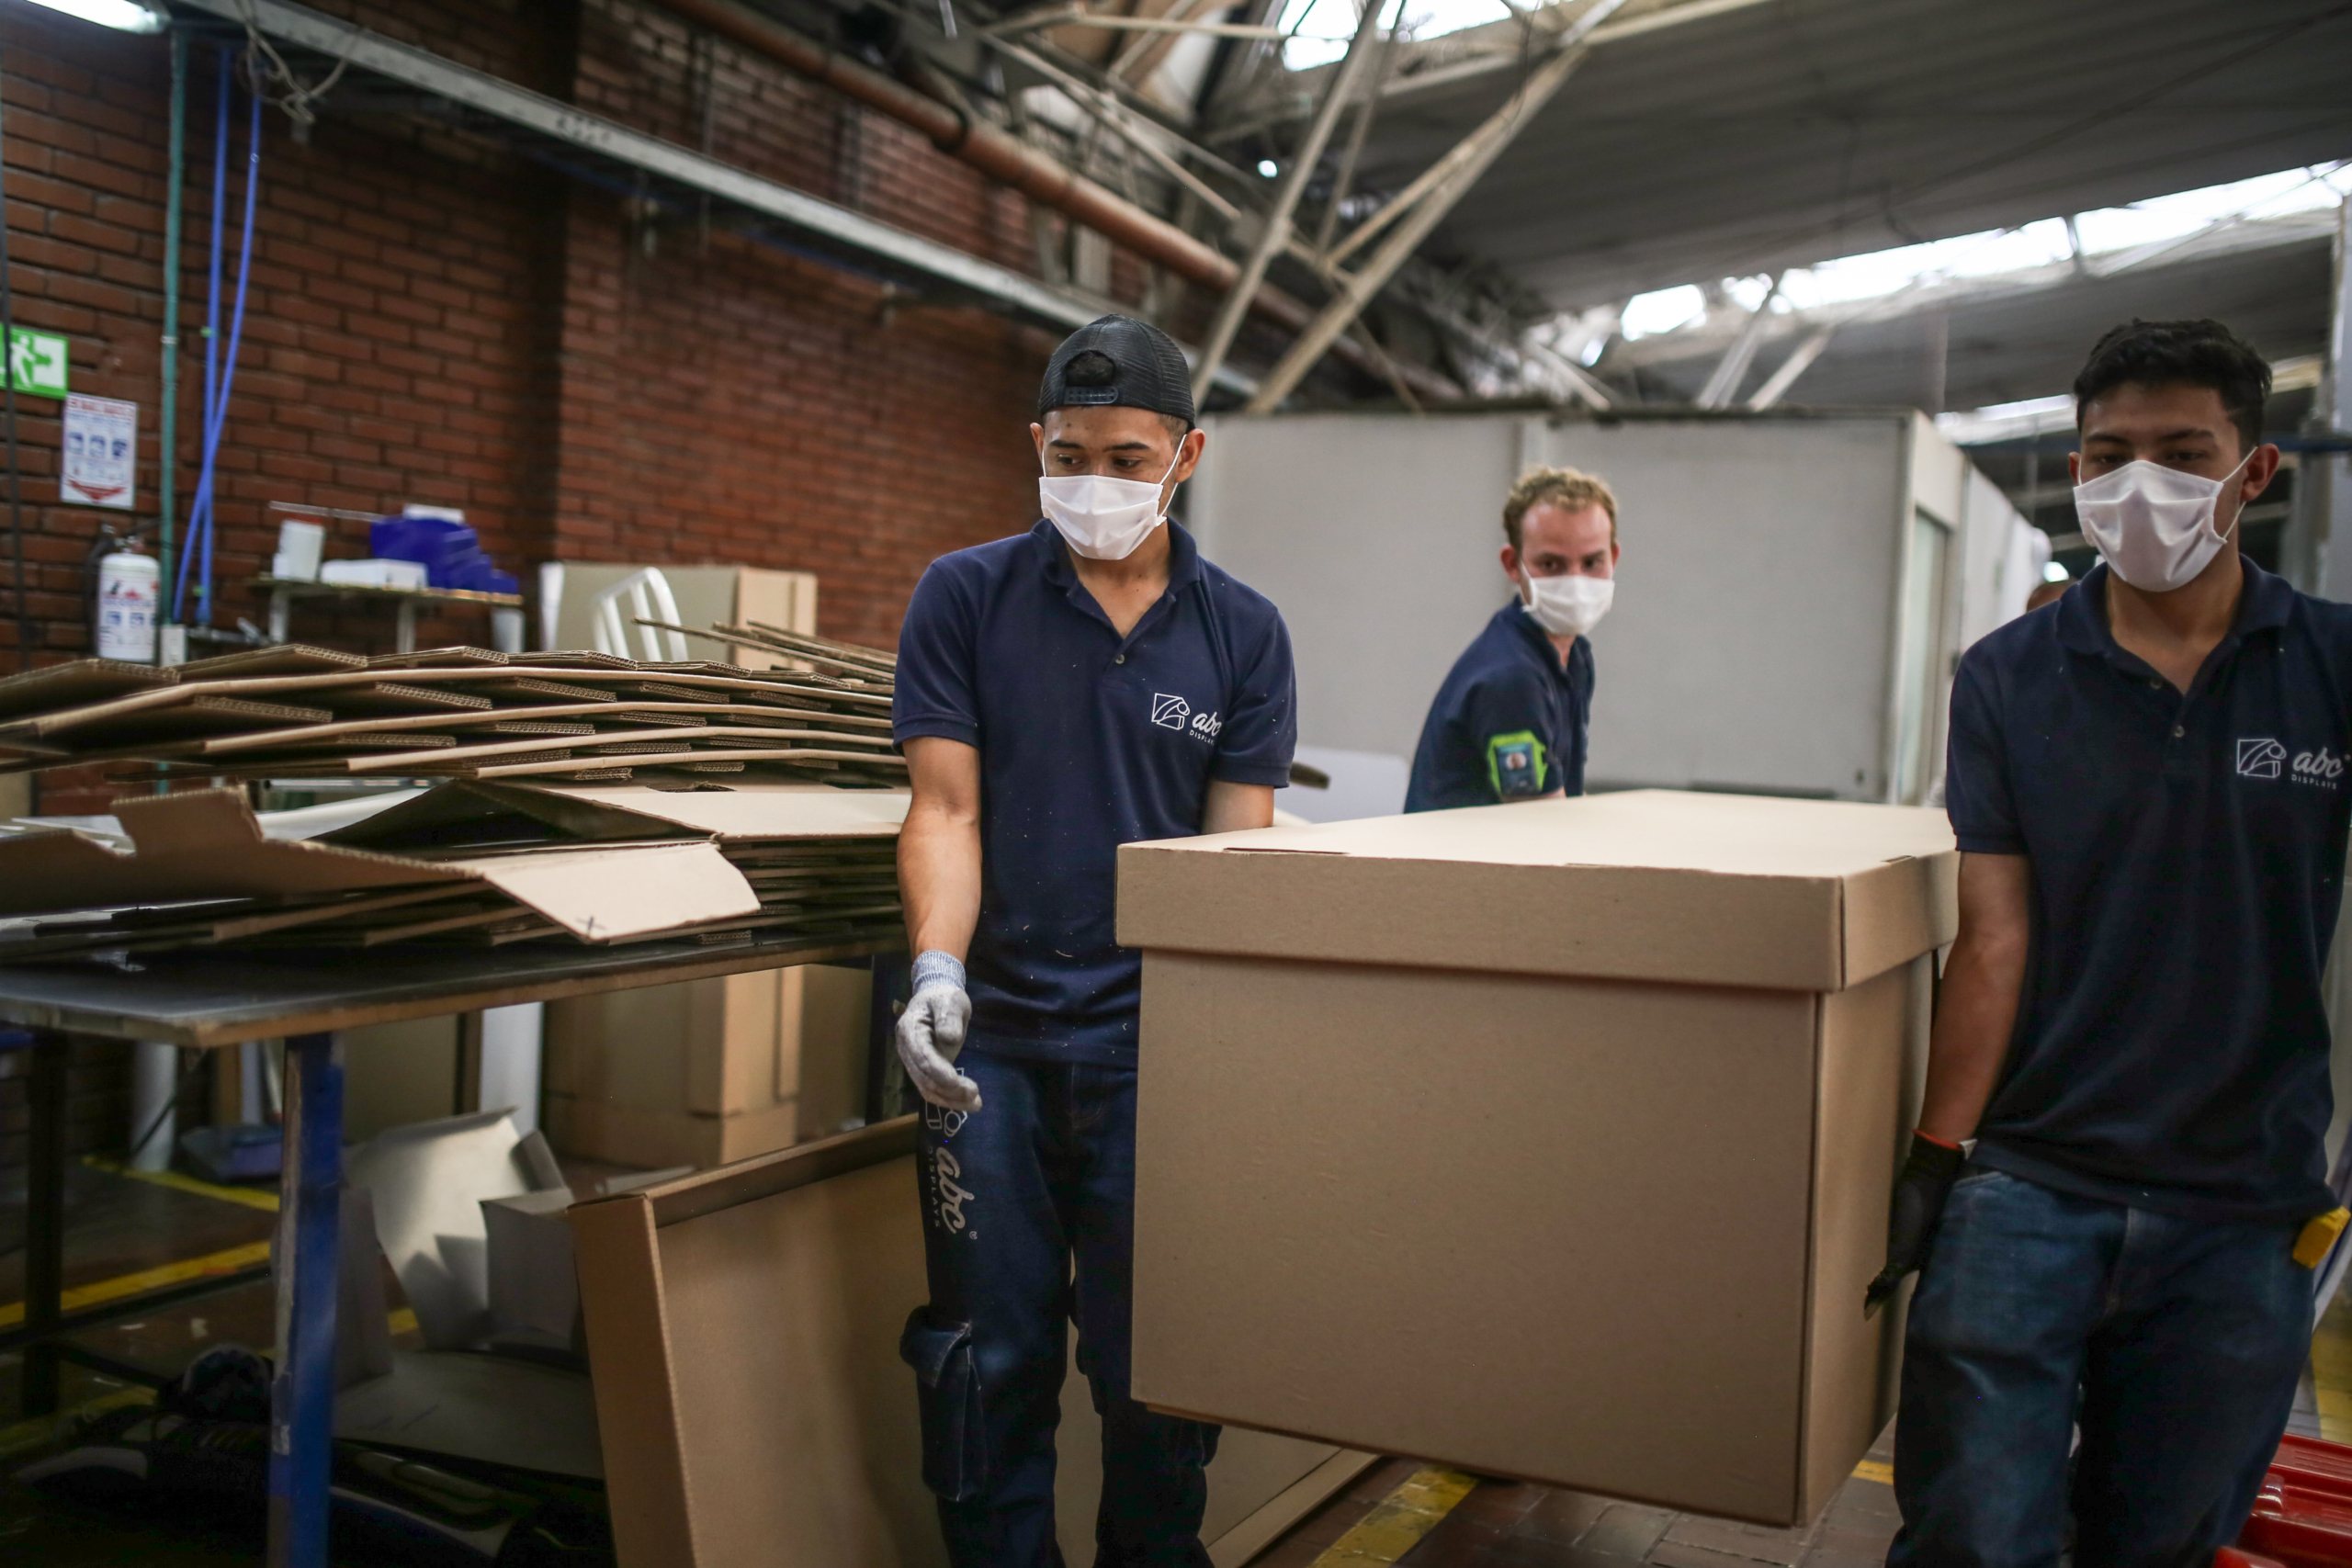 Colombia: A factory design cardboard hospital beds that become coffins on COVID-19 pandemic